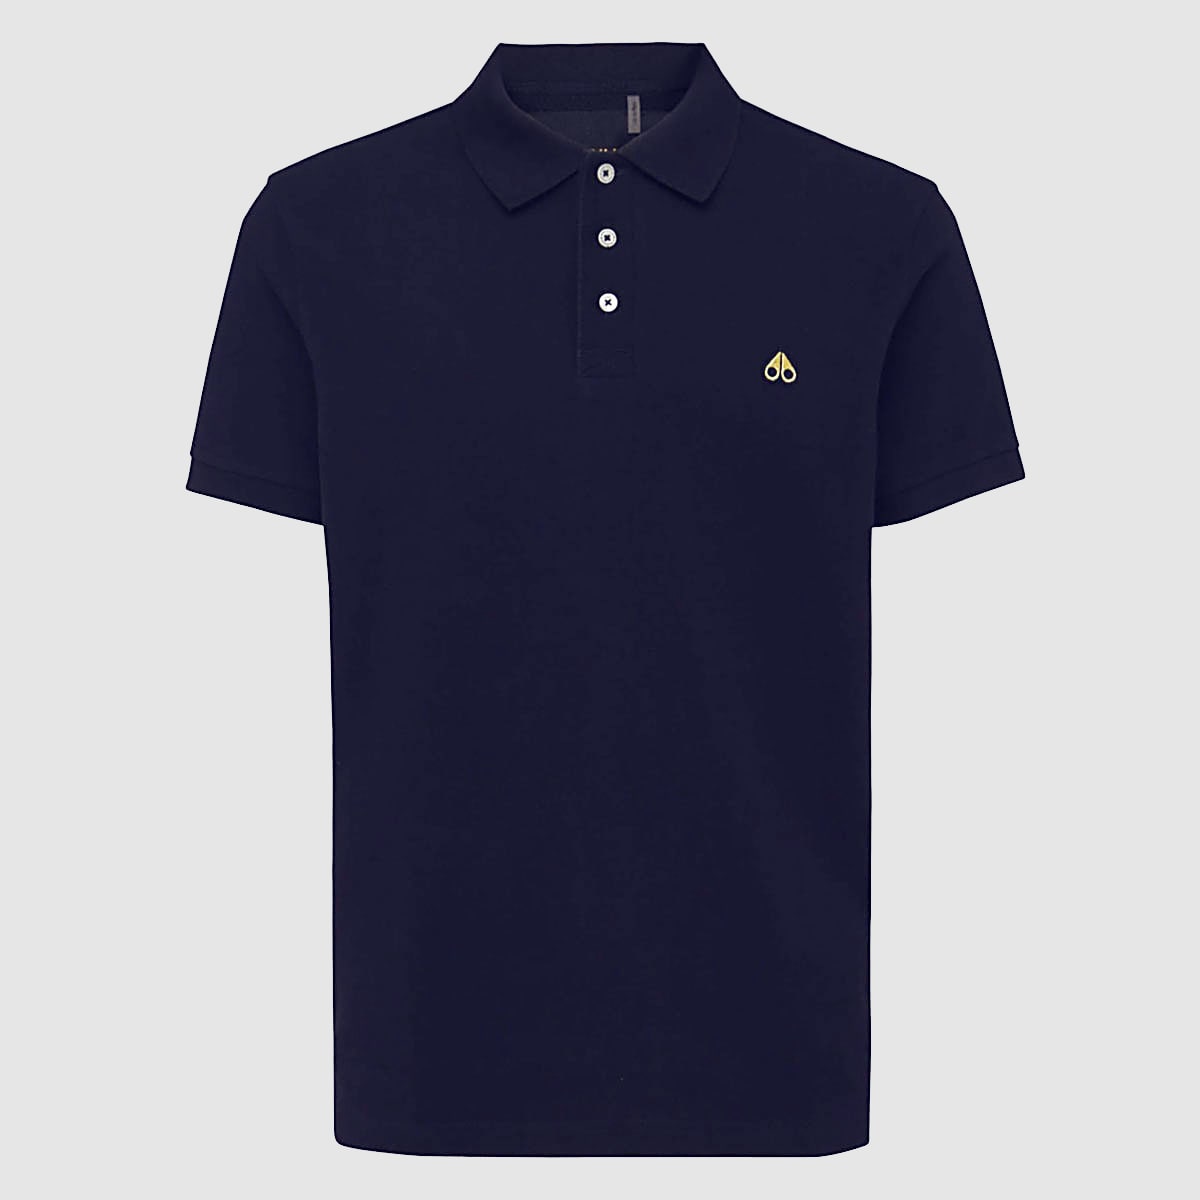 Moose Knuckles Navy Blue Cotton Polo Shirt